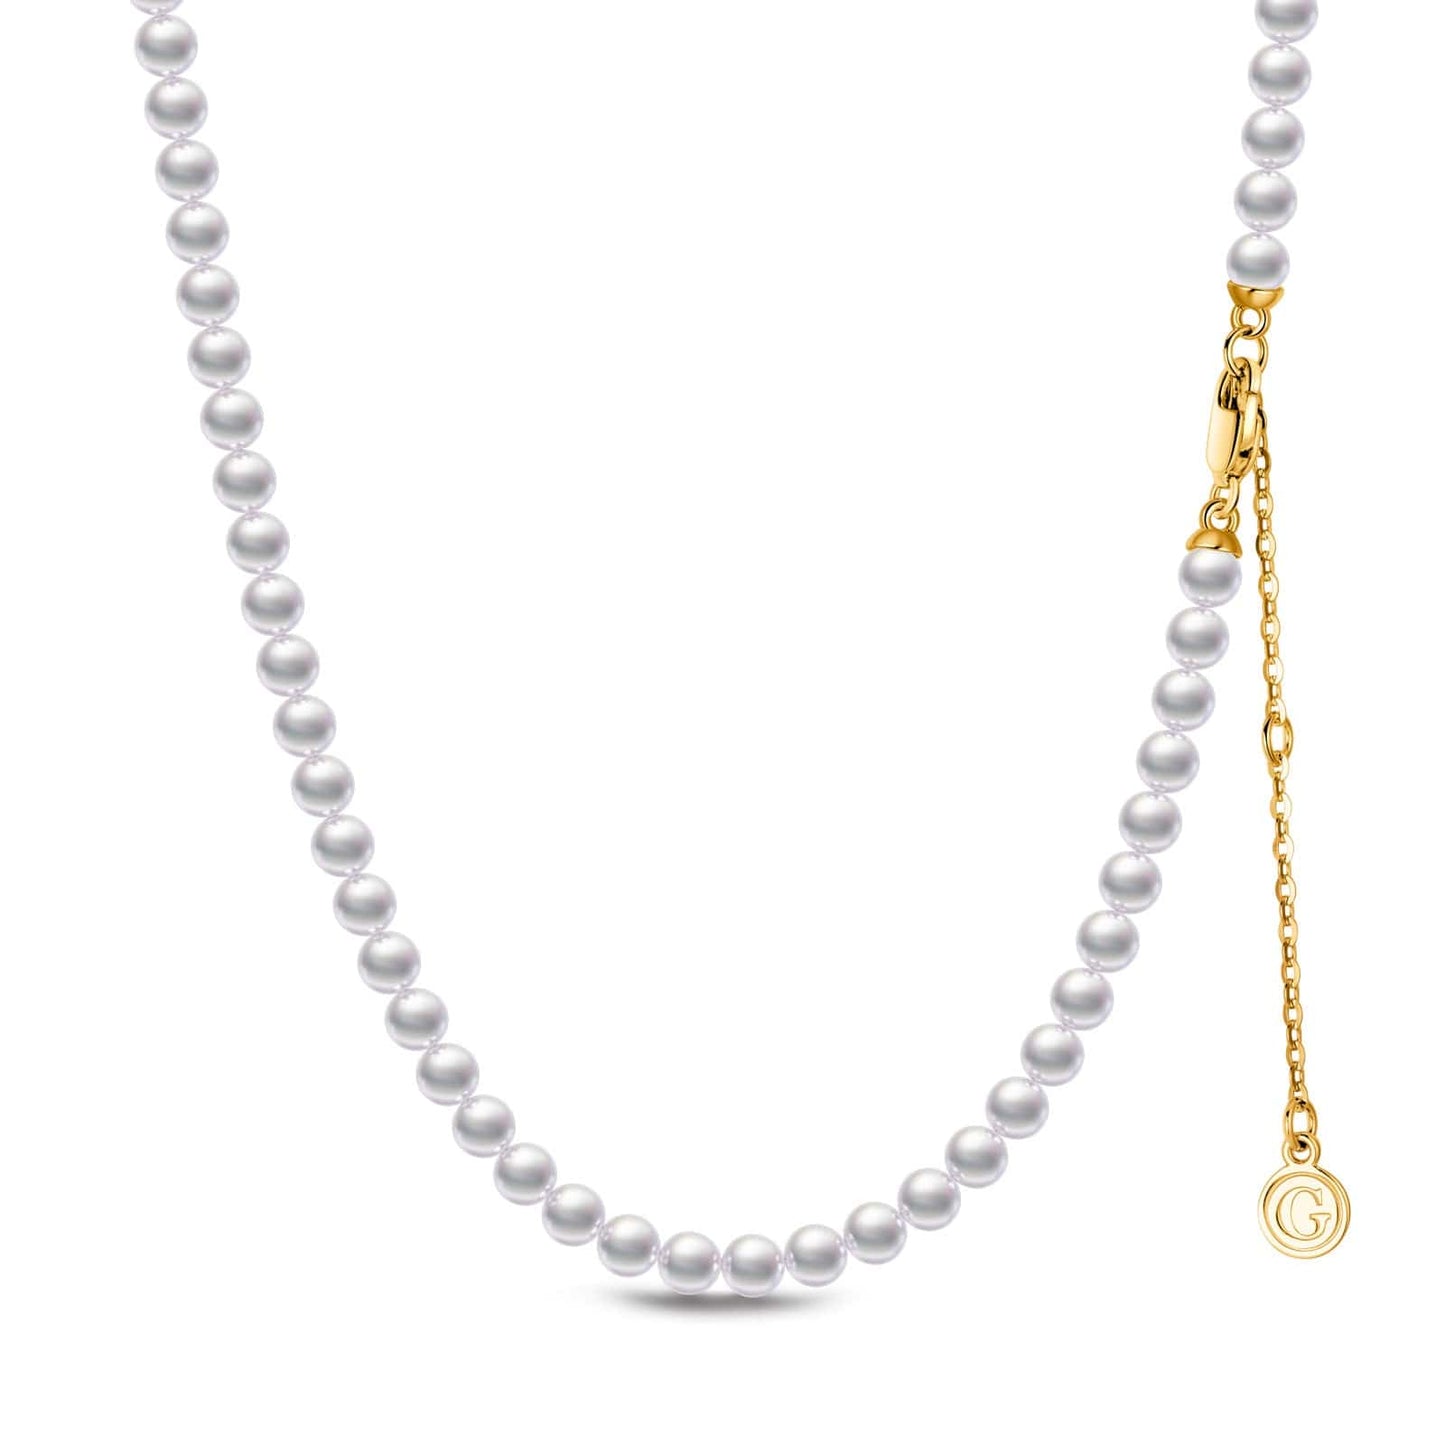 Horseshoe Tarnish-resistant Silver Pearl Necklace In 14K Gold Plated